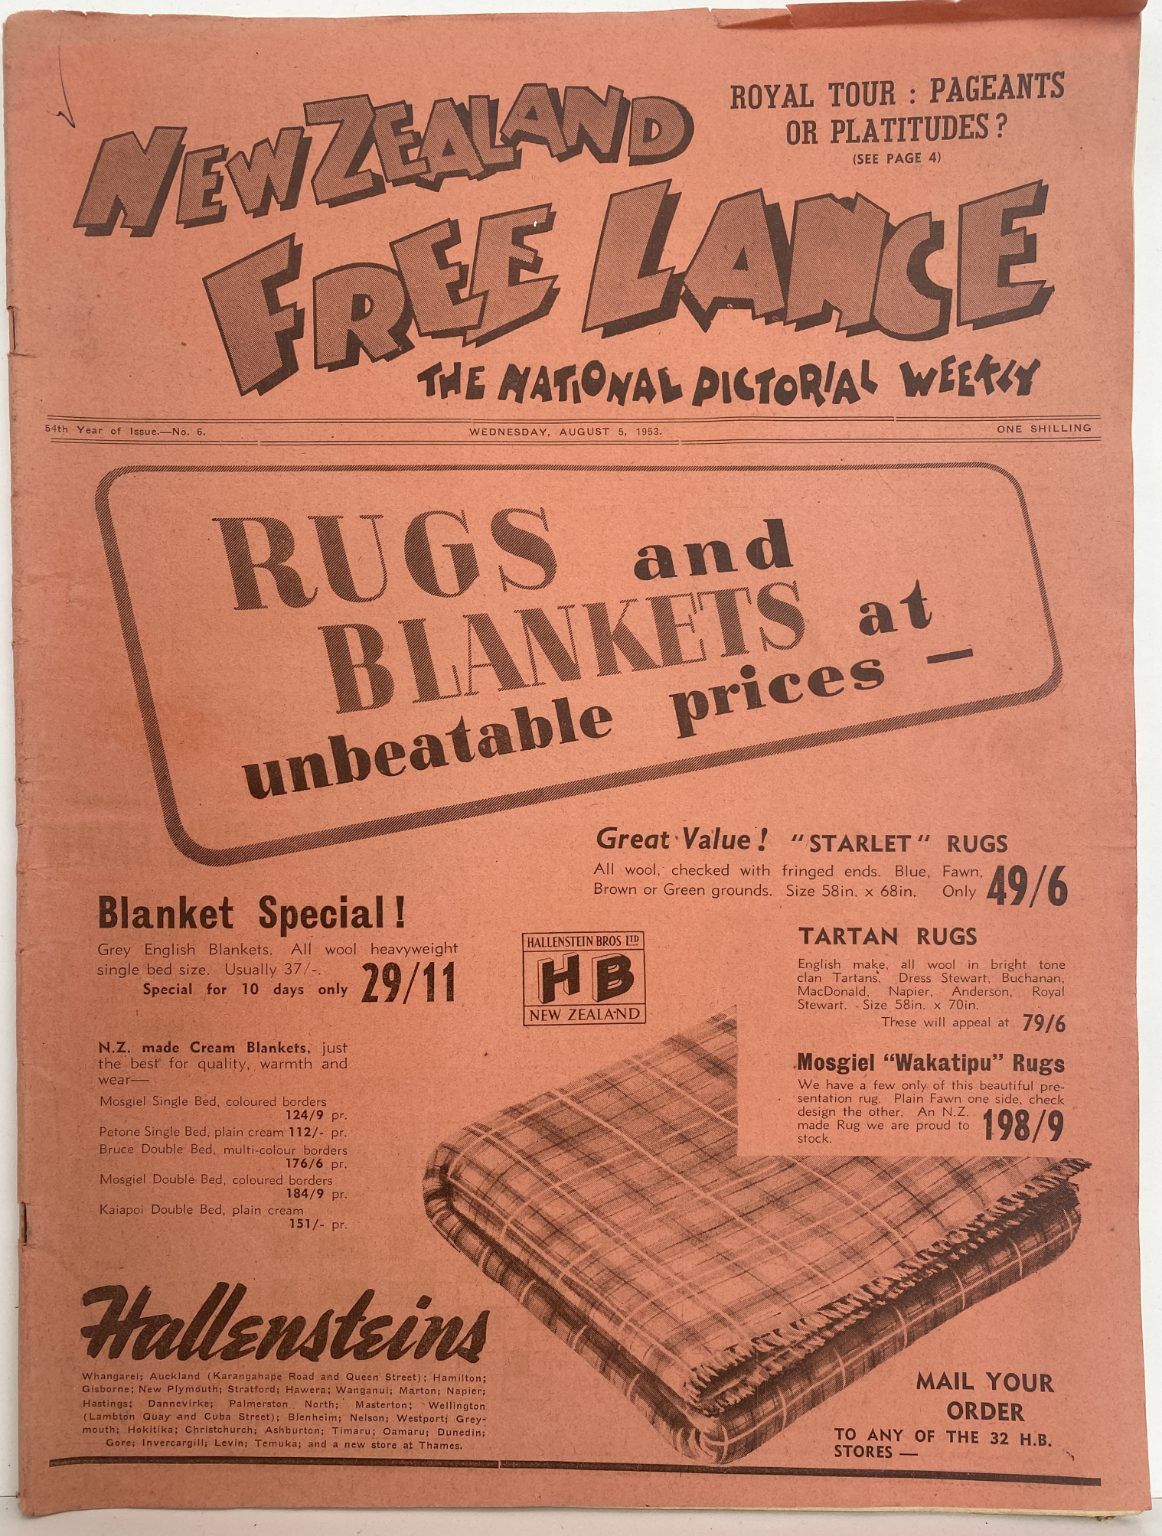 OLD NEWSPAPER: New Zealand Free Lance - No. 6, 5 August 1953